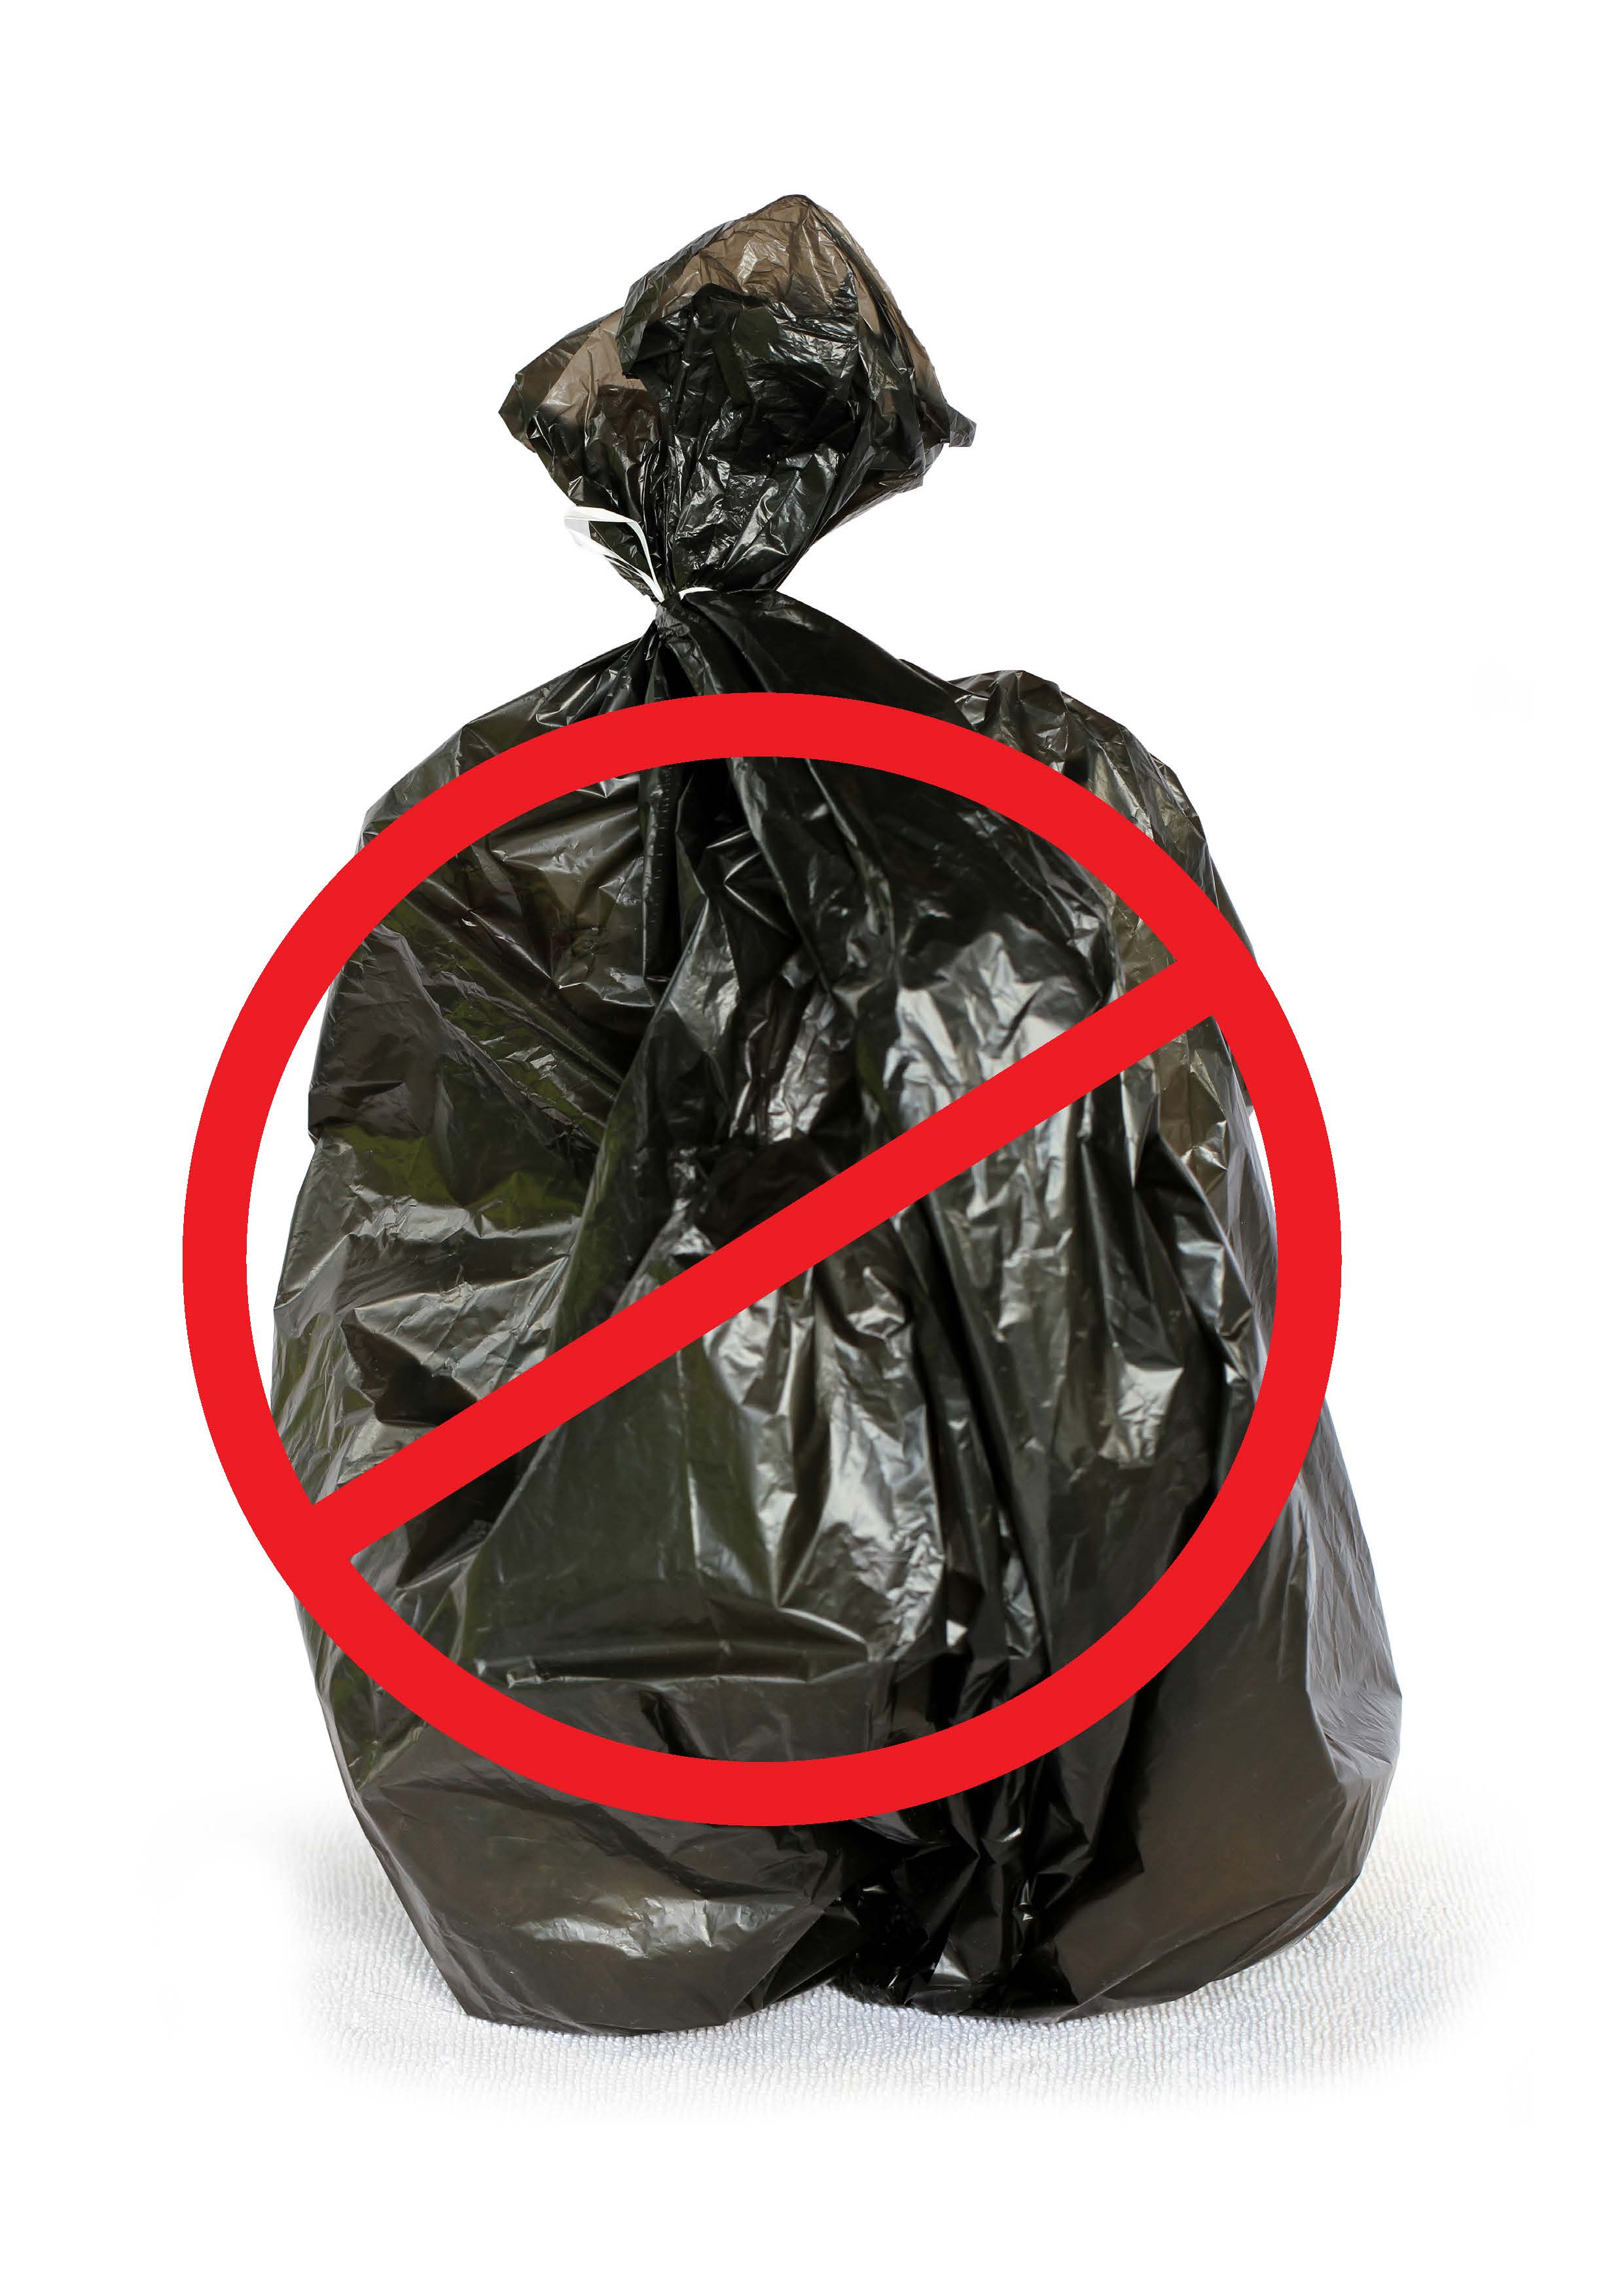 Trash Bags You Won't Throw Out (Published 2013)